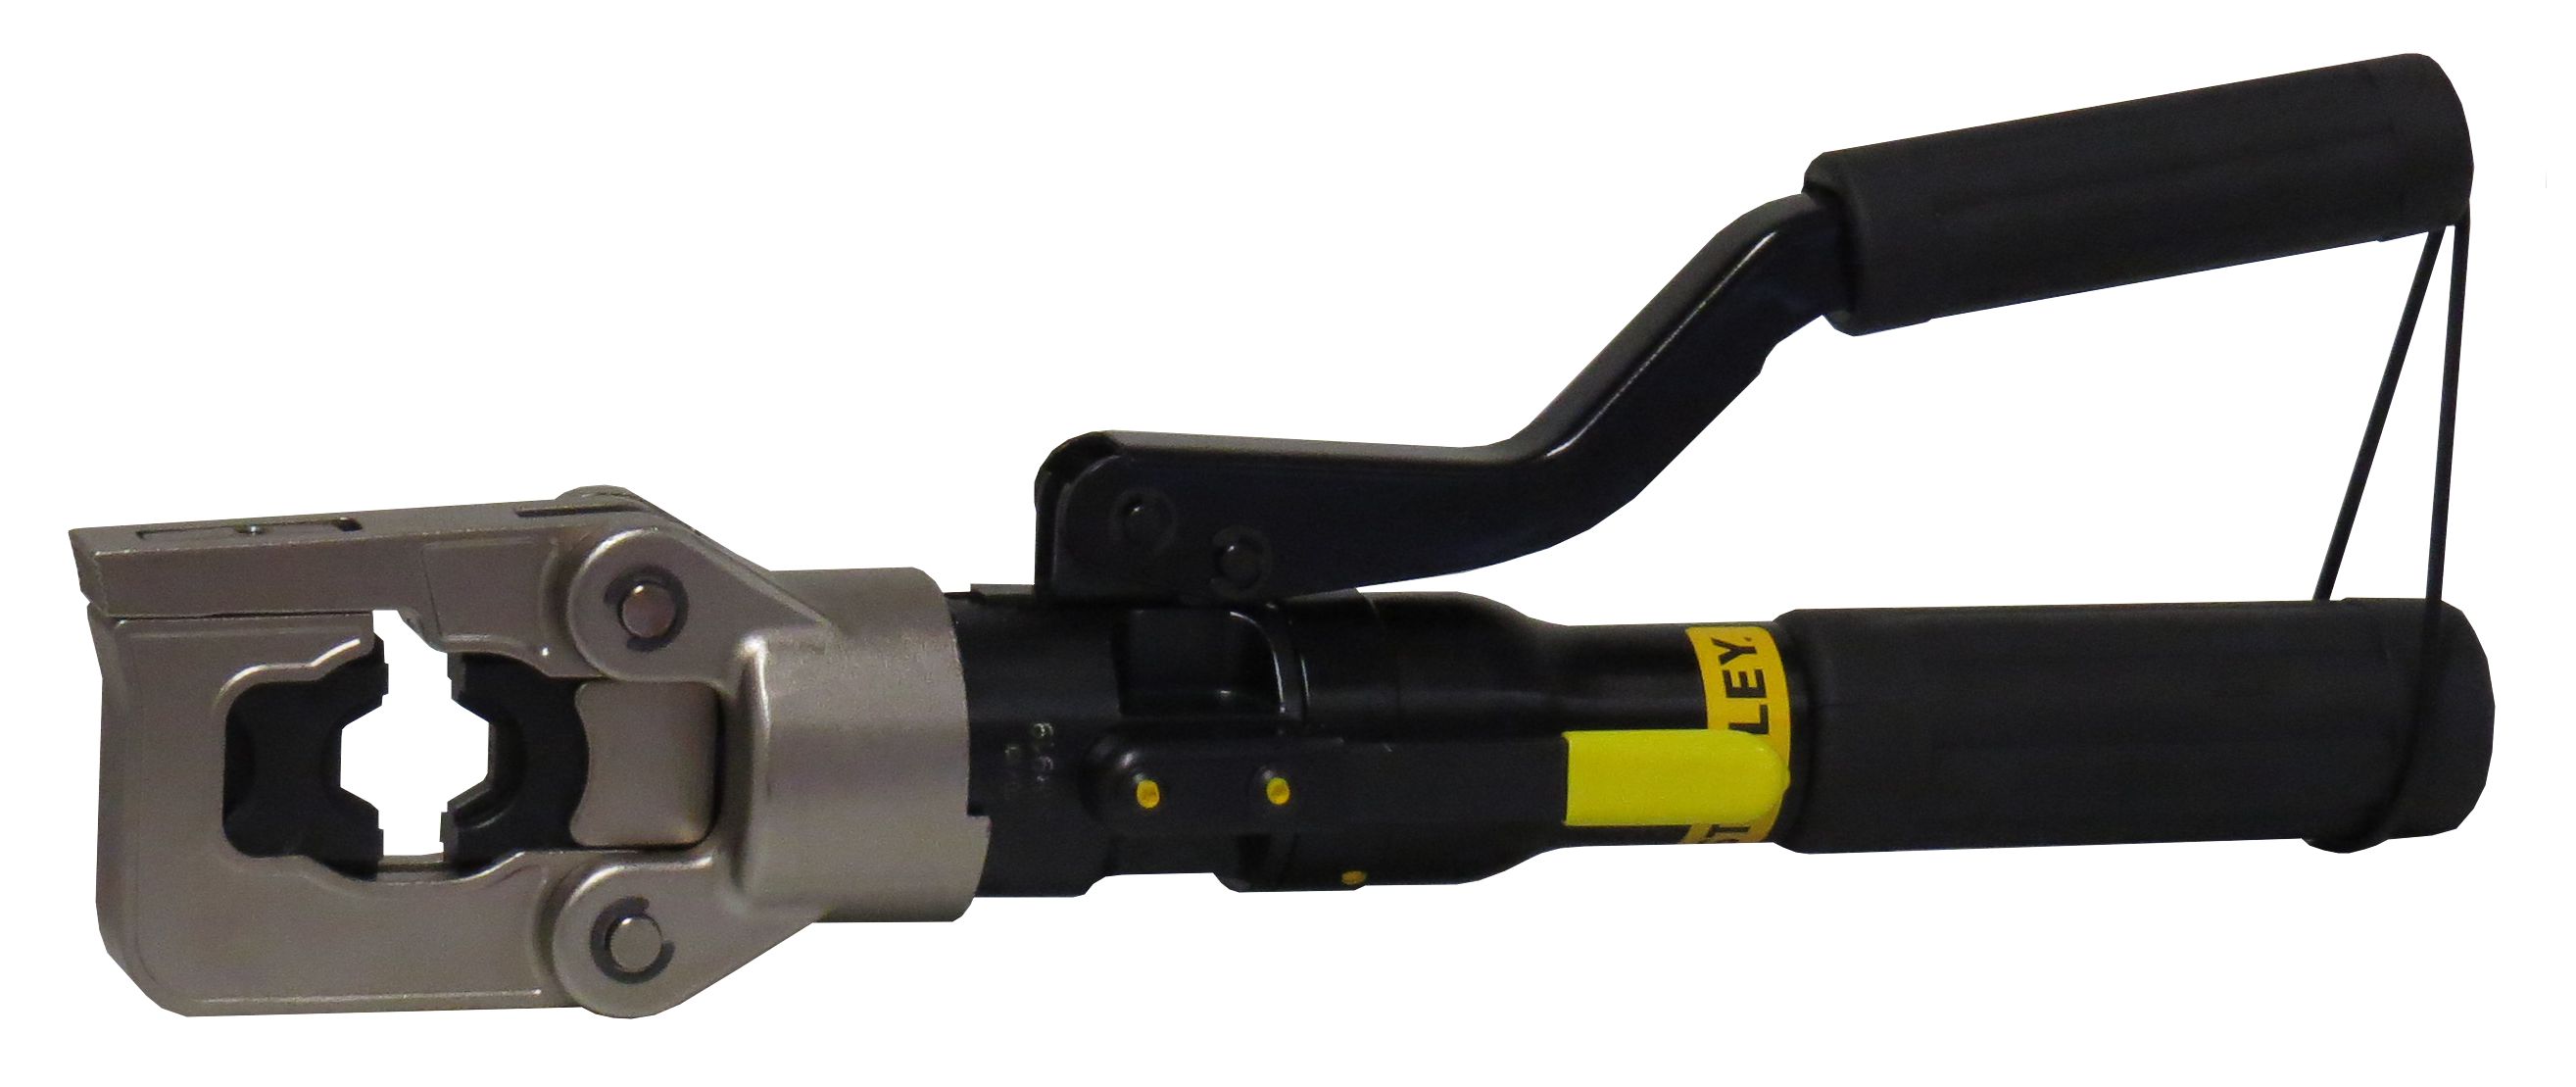 HP60HE - Manual operated hydraulic crimping tool, 55 kN, for inserts series "60-H"